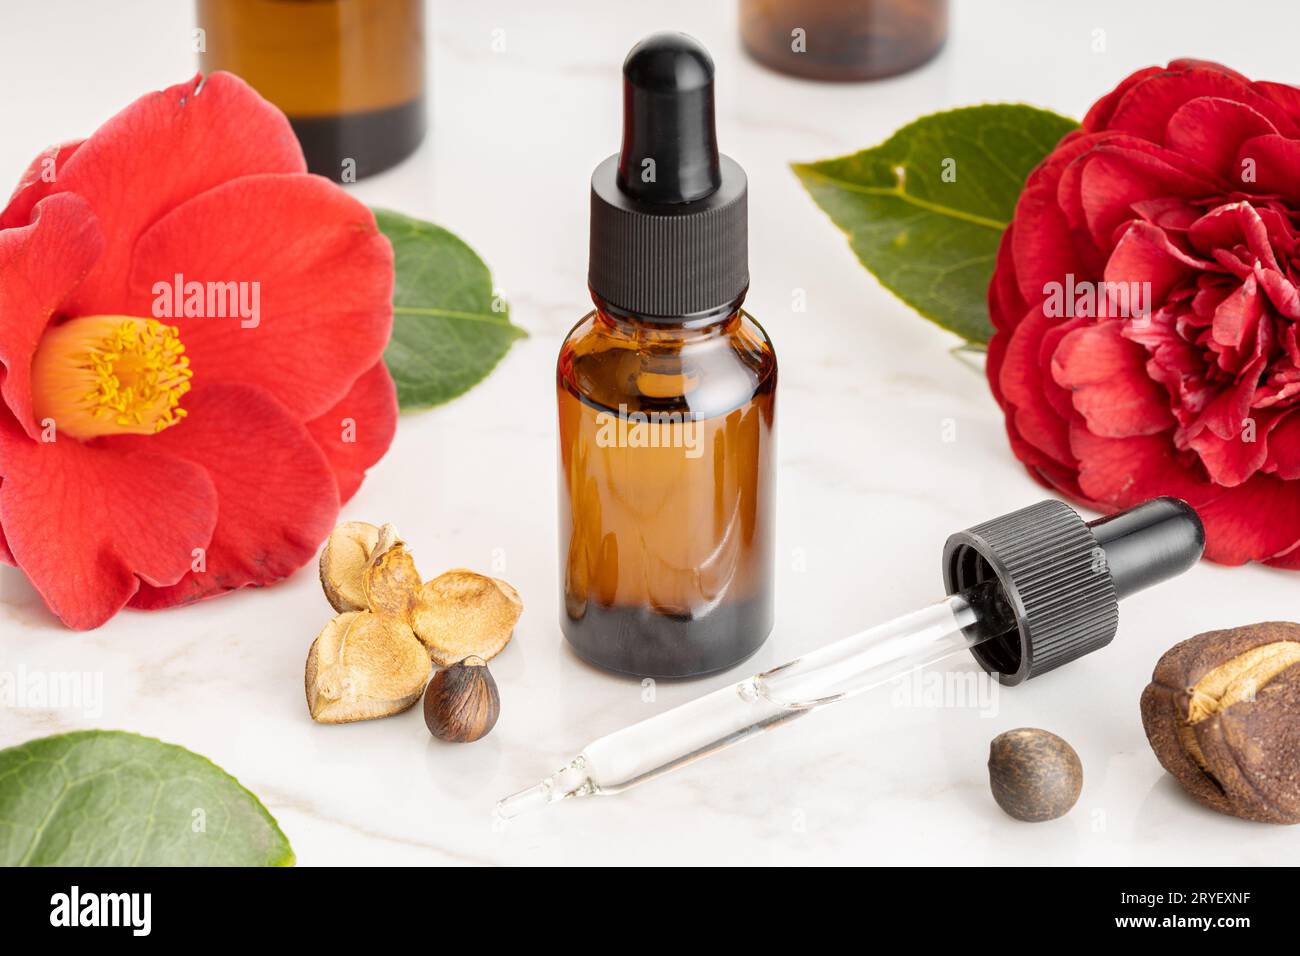 Camellia essential oil. Camellia flower, seeds and oil glass bottle for beauty, skin care, wellness Stock Photo